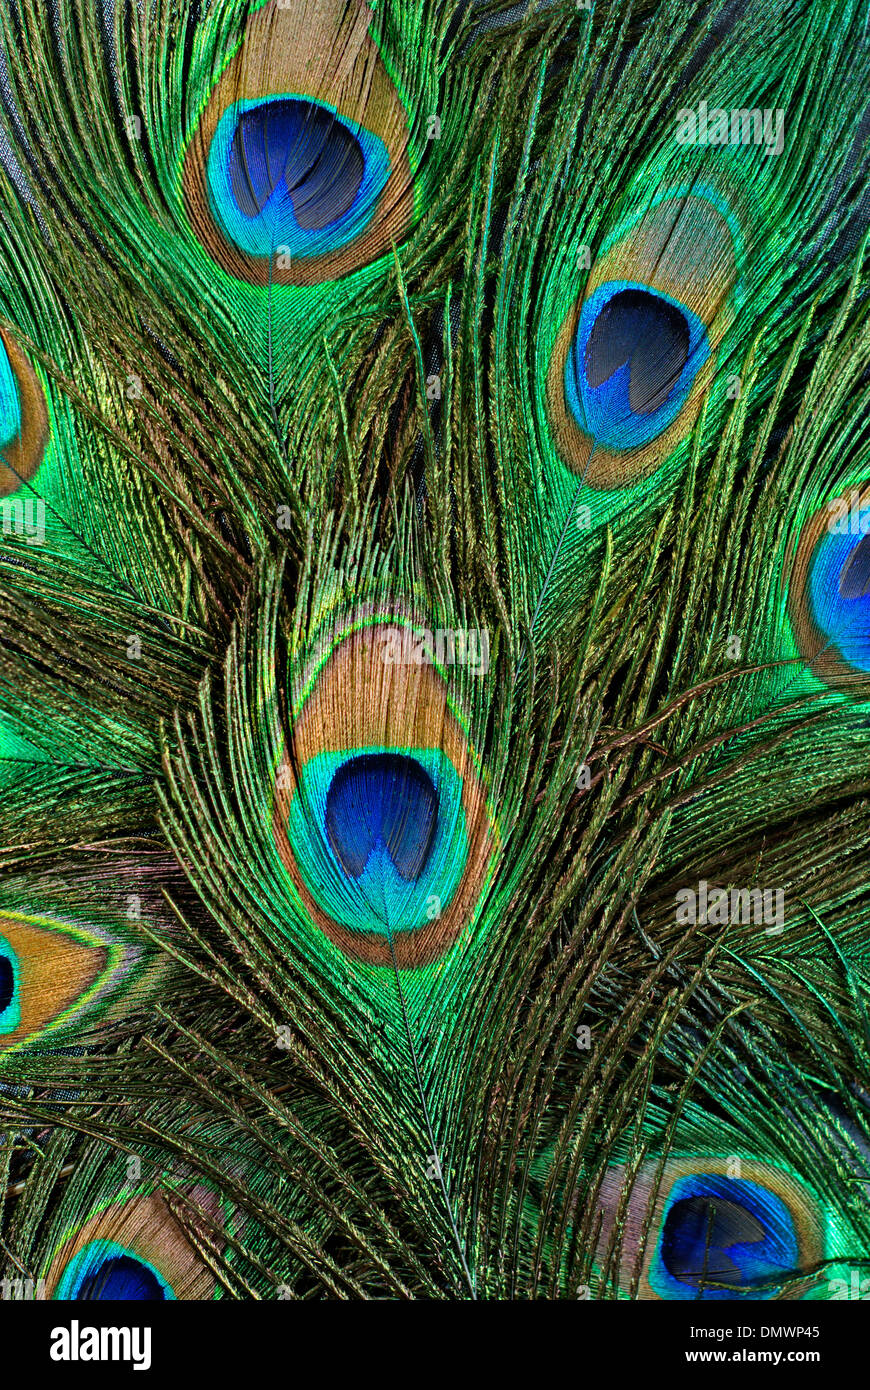 background close-up of feather of a peacock Stock Photo